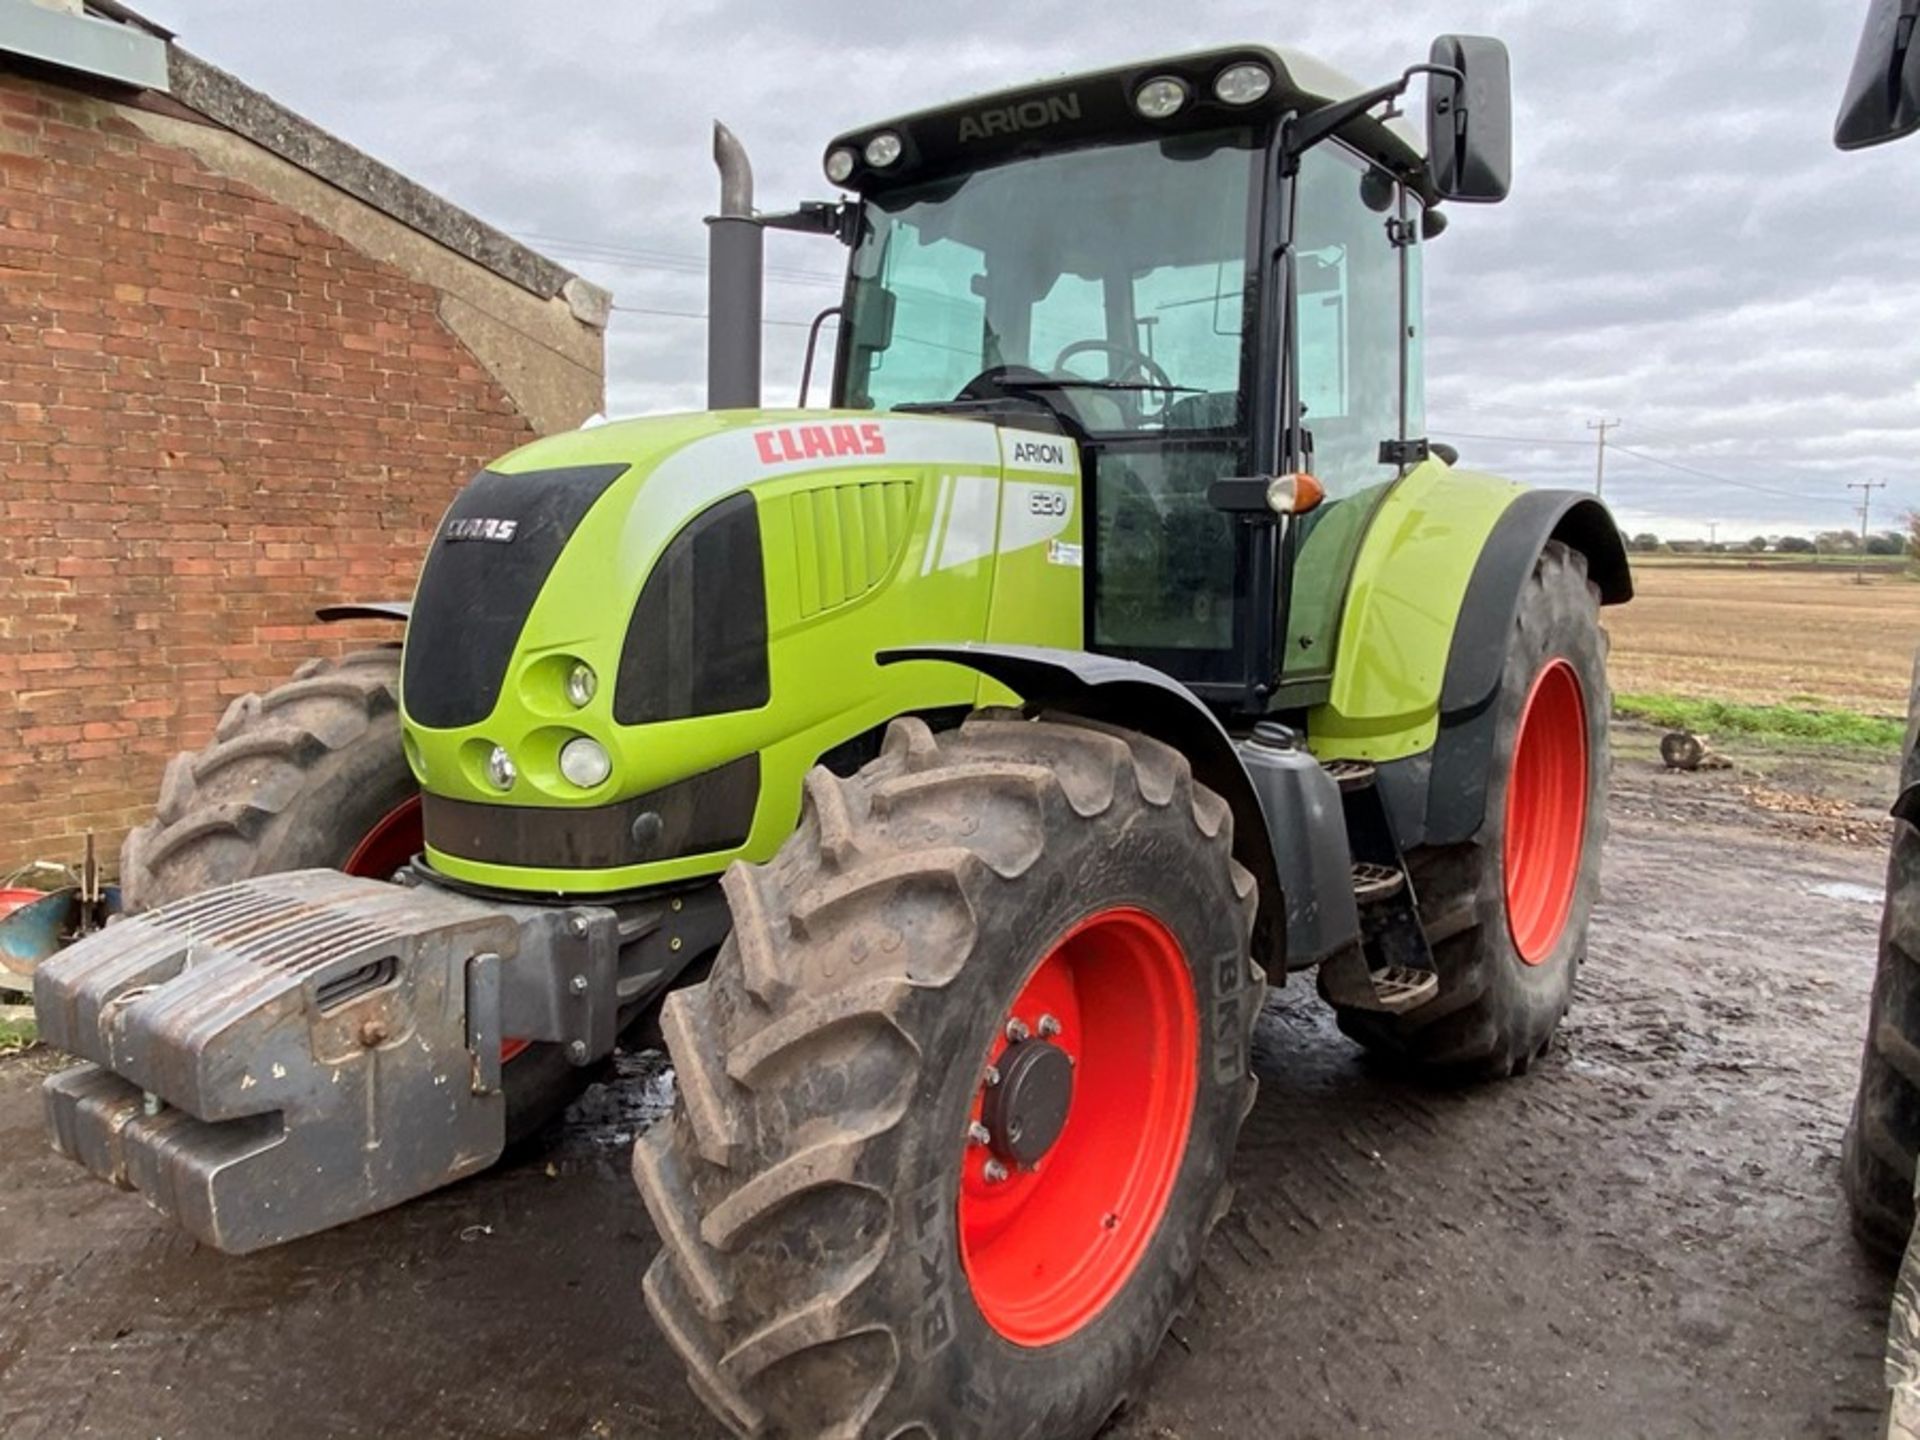 2009 Claas Arion 620 Tractor, 5571hrs, Reg Number AU09 DLN, serial number A1902356